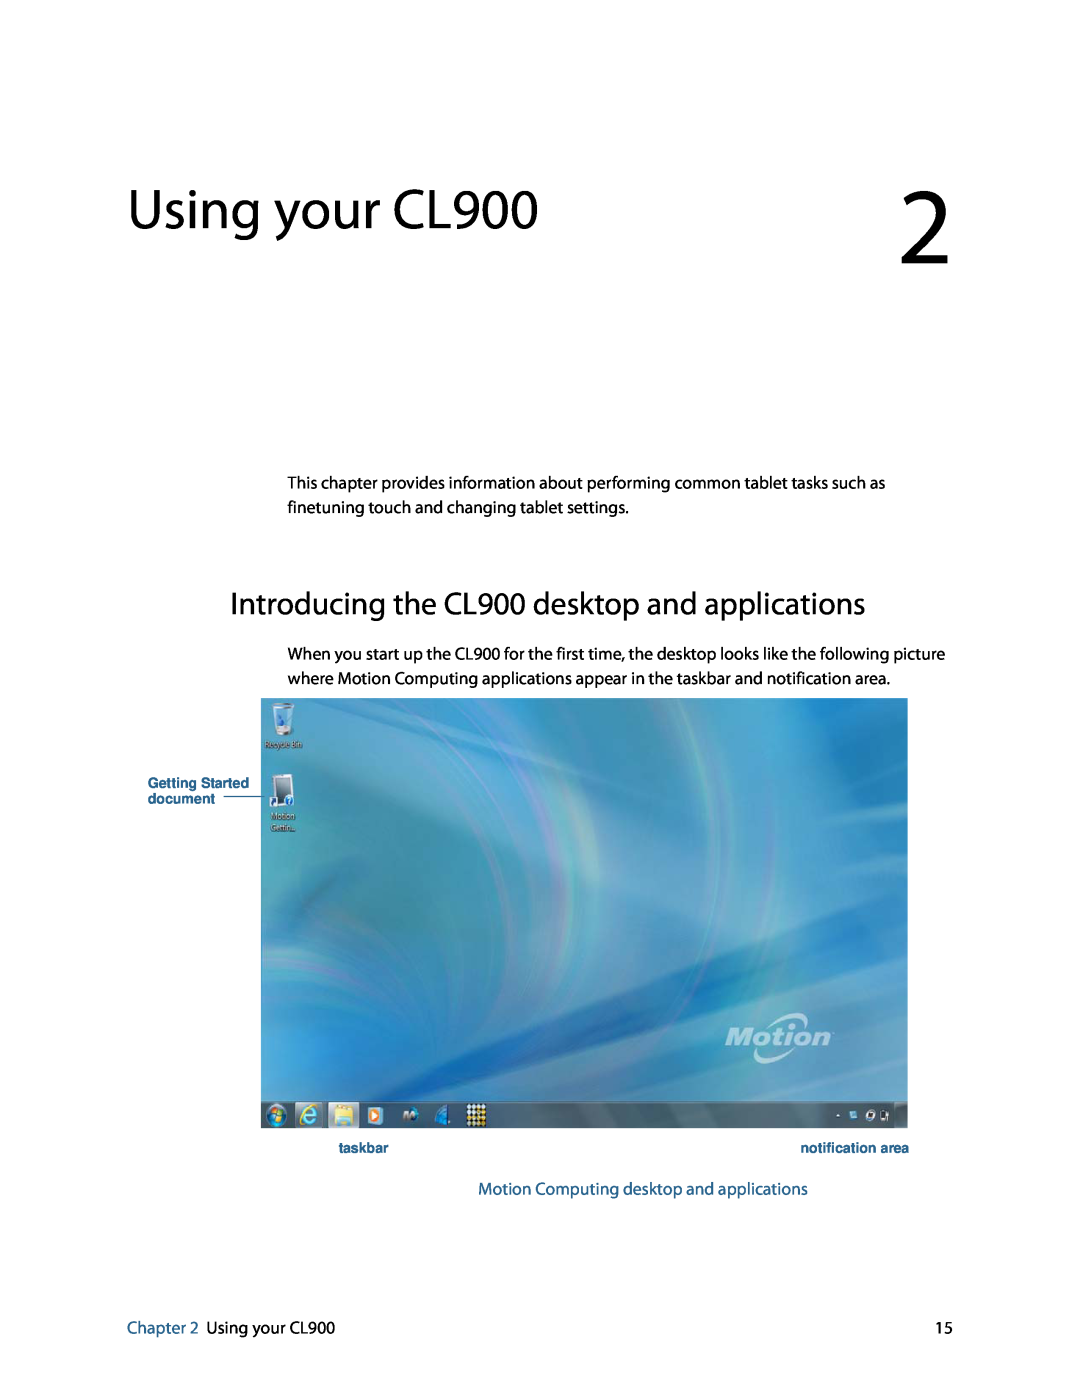 Motion FWS-001 Using your CL900, Introducing the CL900 desktop and applications, Motion Computing desktop and applications 